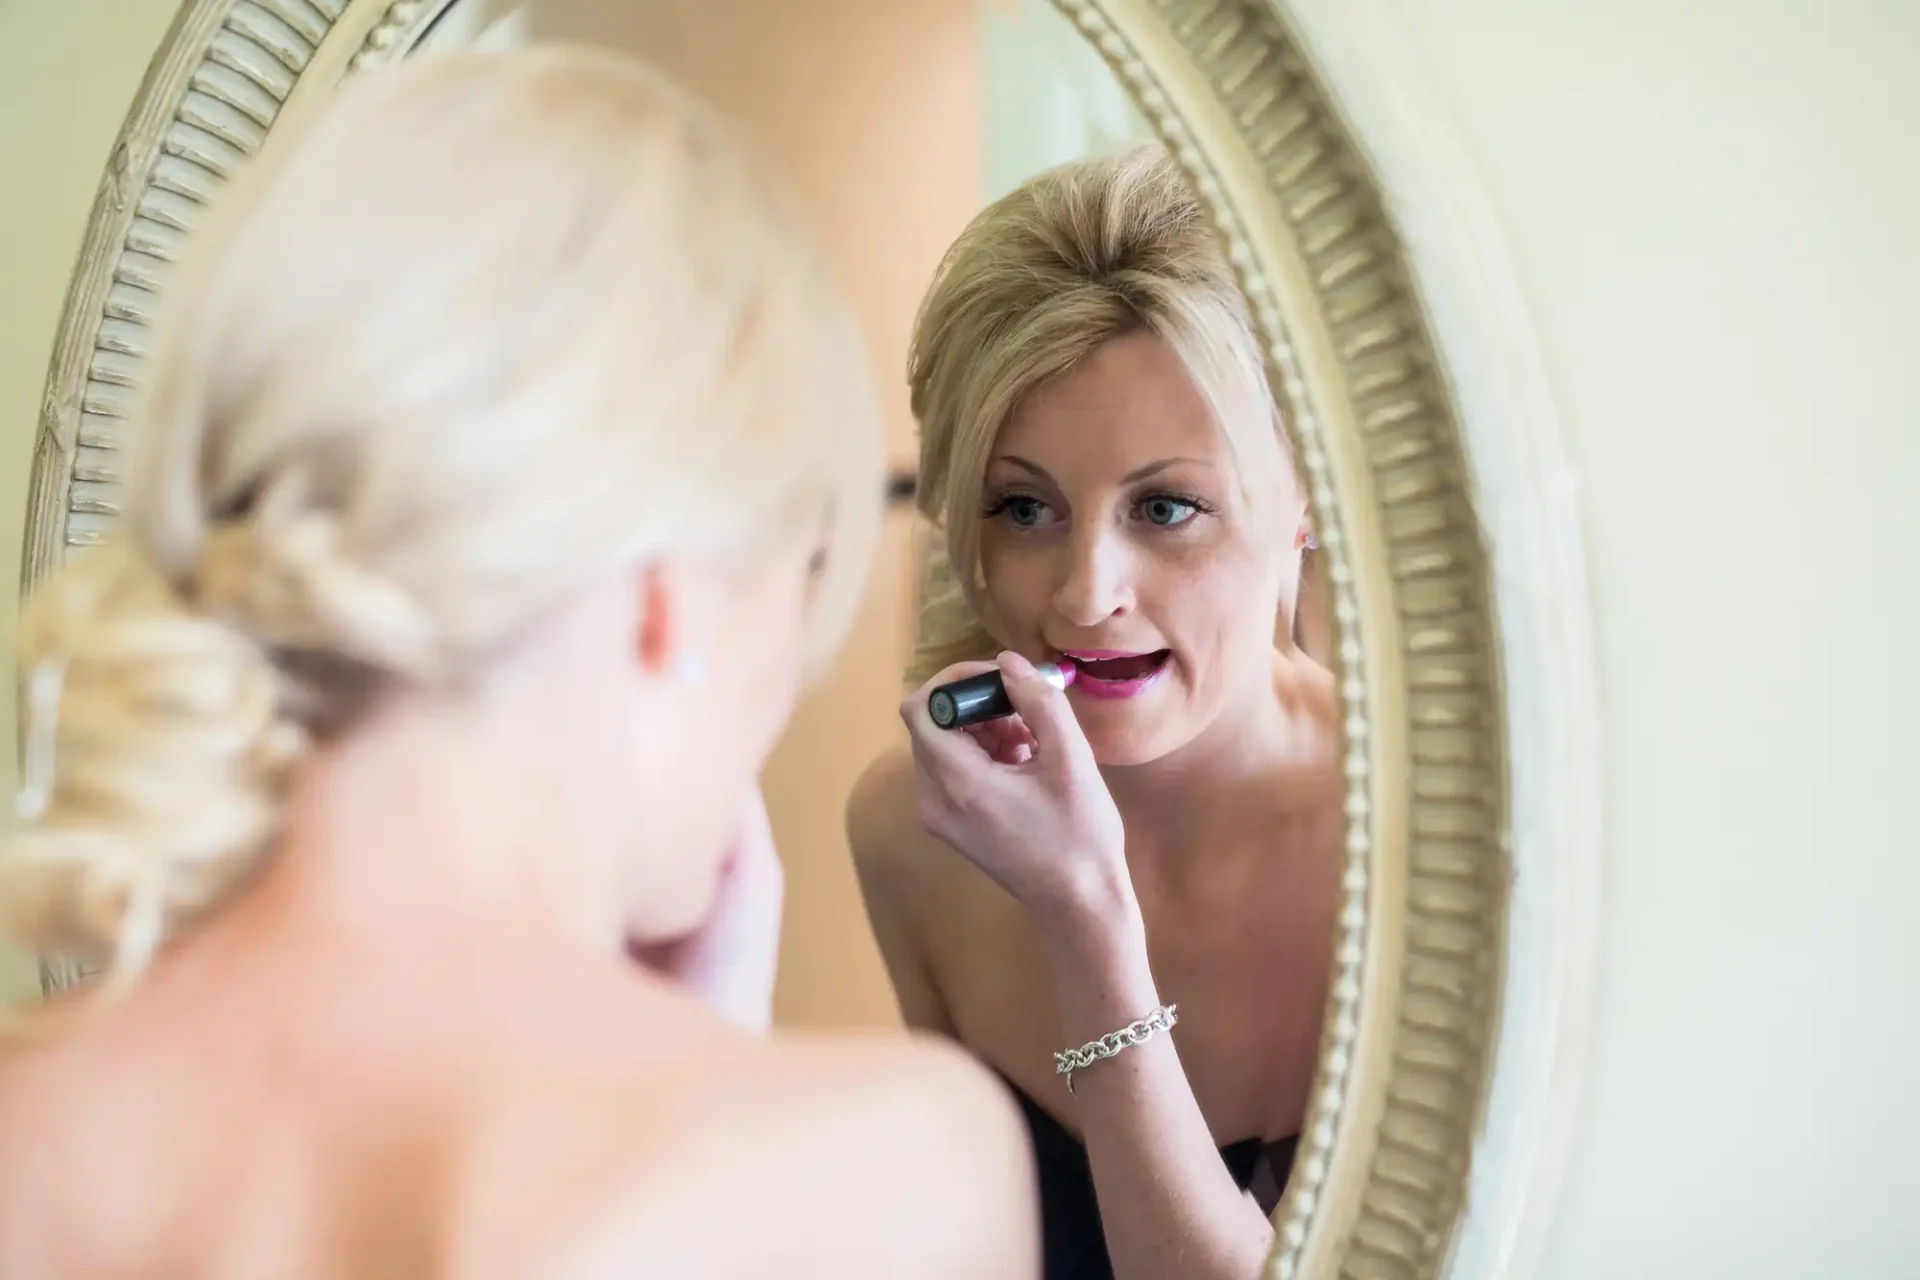 A woman applying lipstick while looking at her reflection in a mirror.